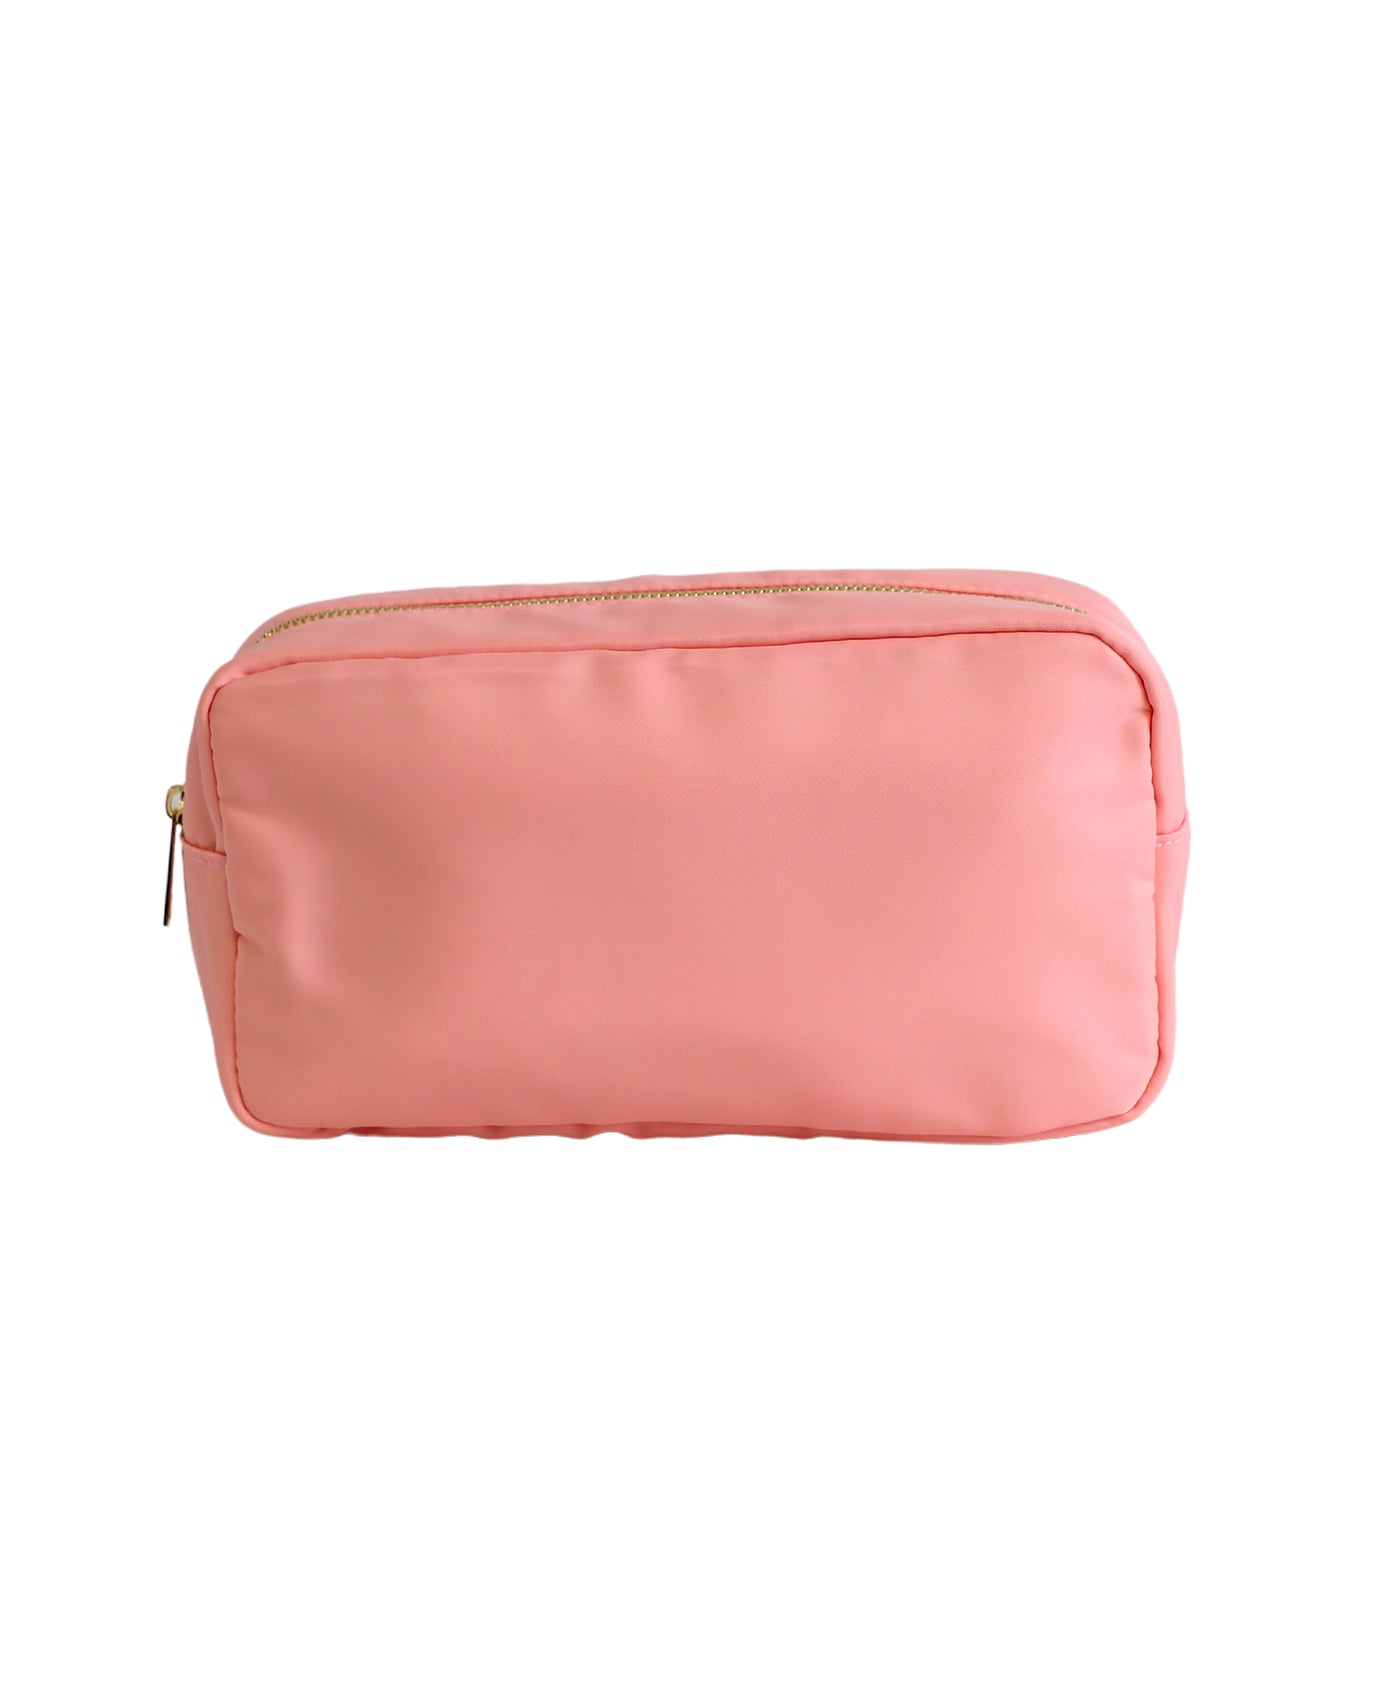 Peach Large Pouch image 1